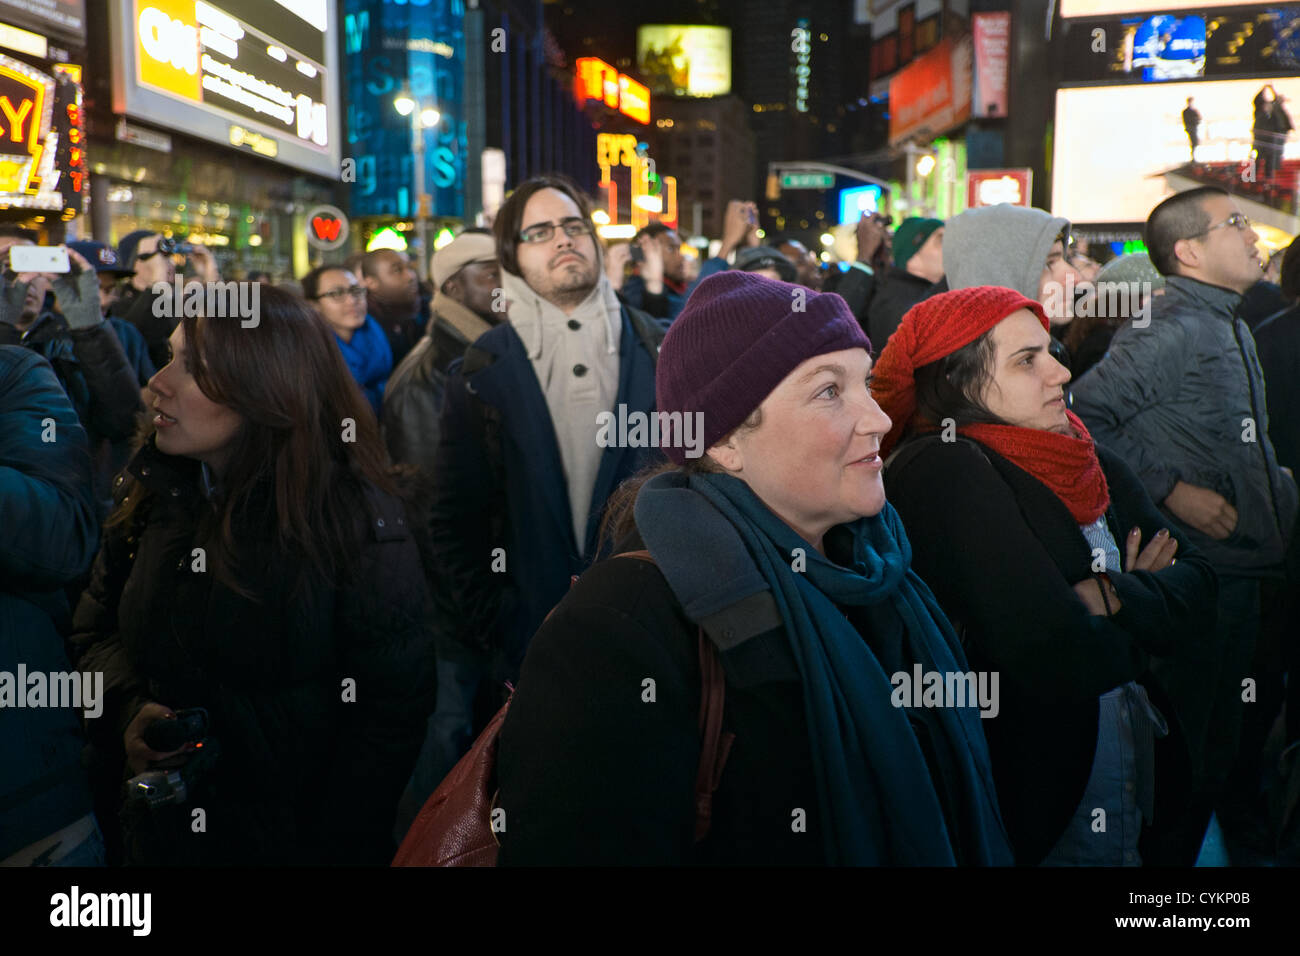 November 7, 2012, New York, NY, US.  Faces in the crowd in Times Square as New York celebrates President Barack Obama's reelection victory in the 2012 United States presidential election. Stock Photo